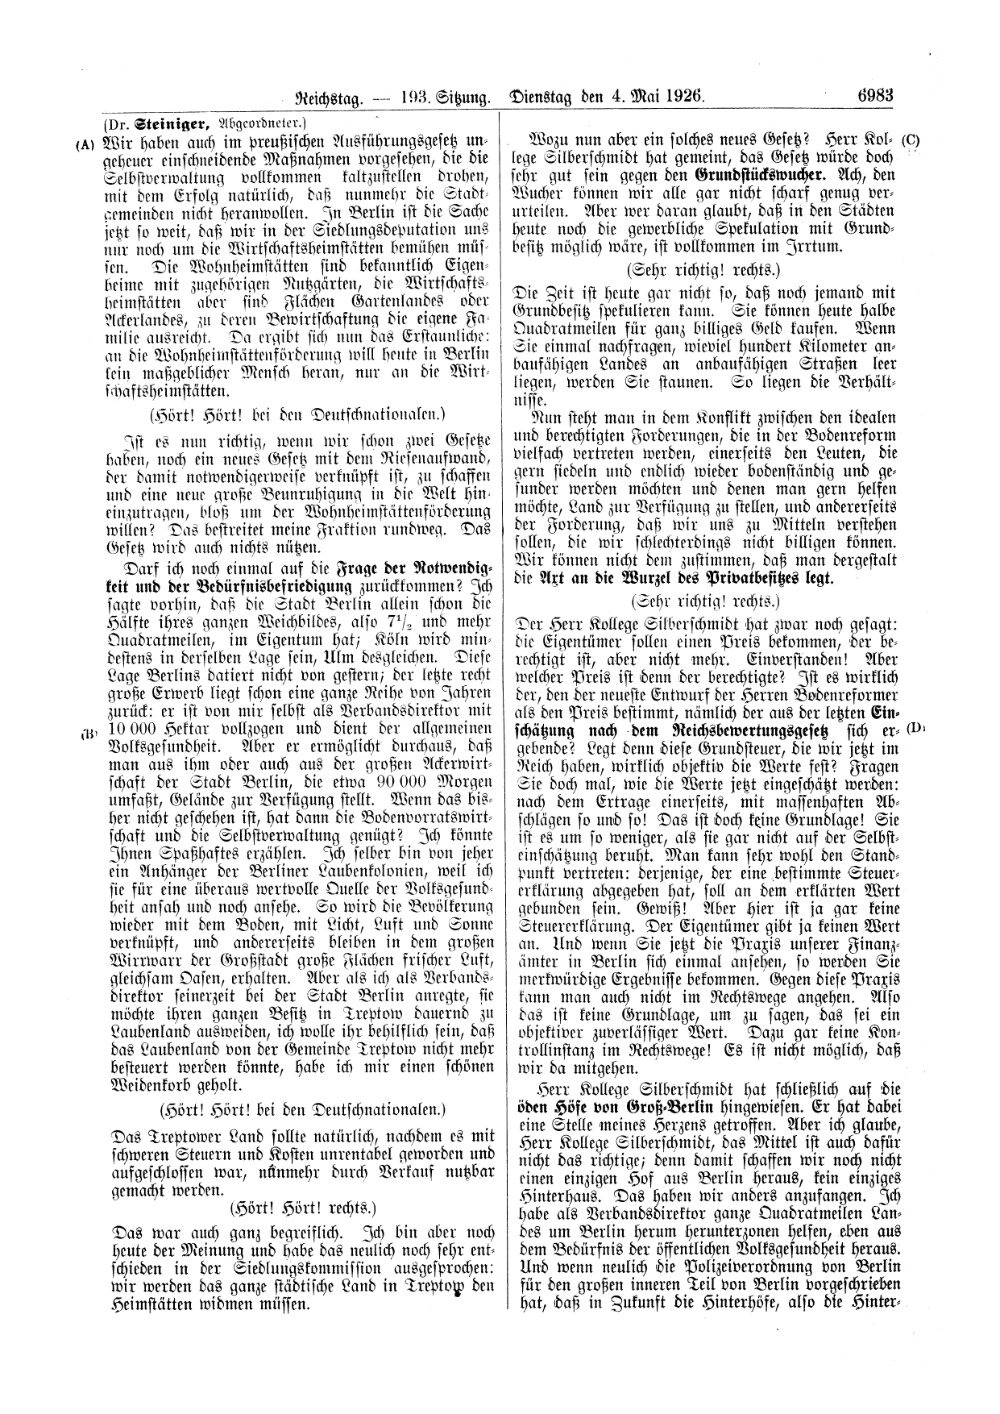 Scan of page 6983